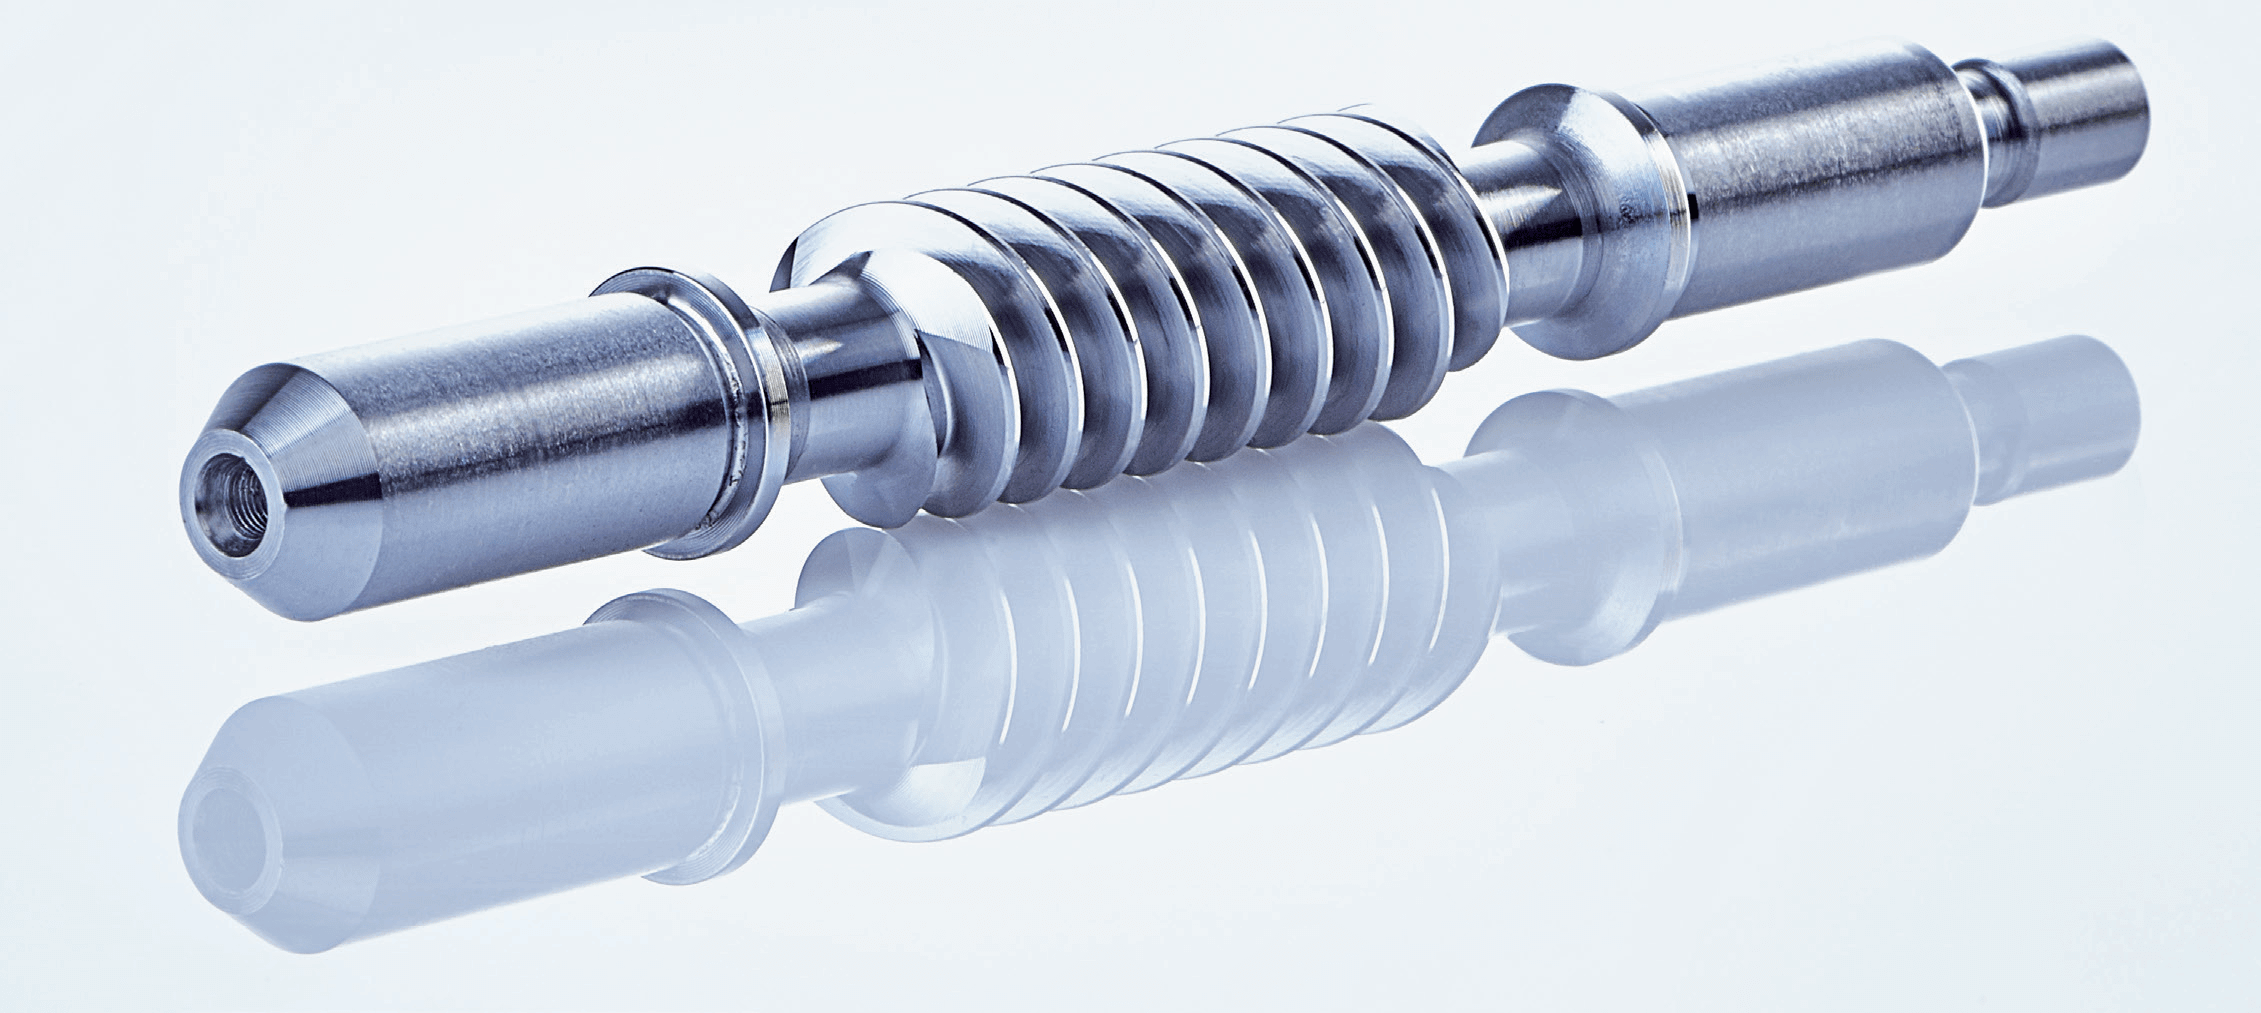 60% Reduction in Manufacturing Worm Gears